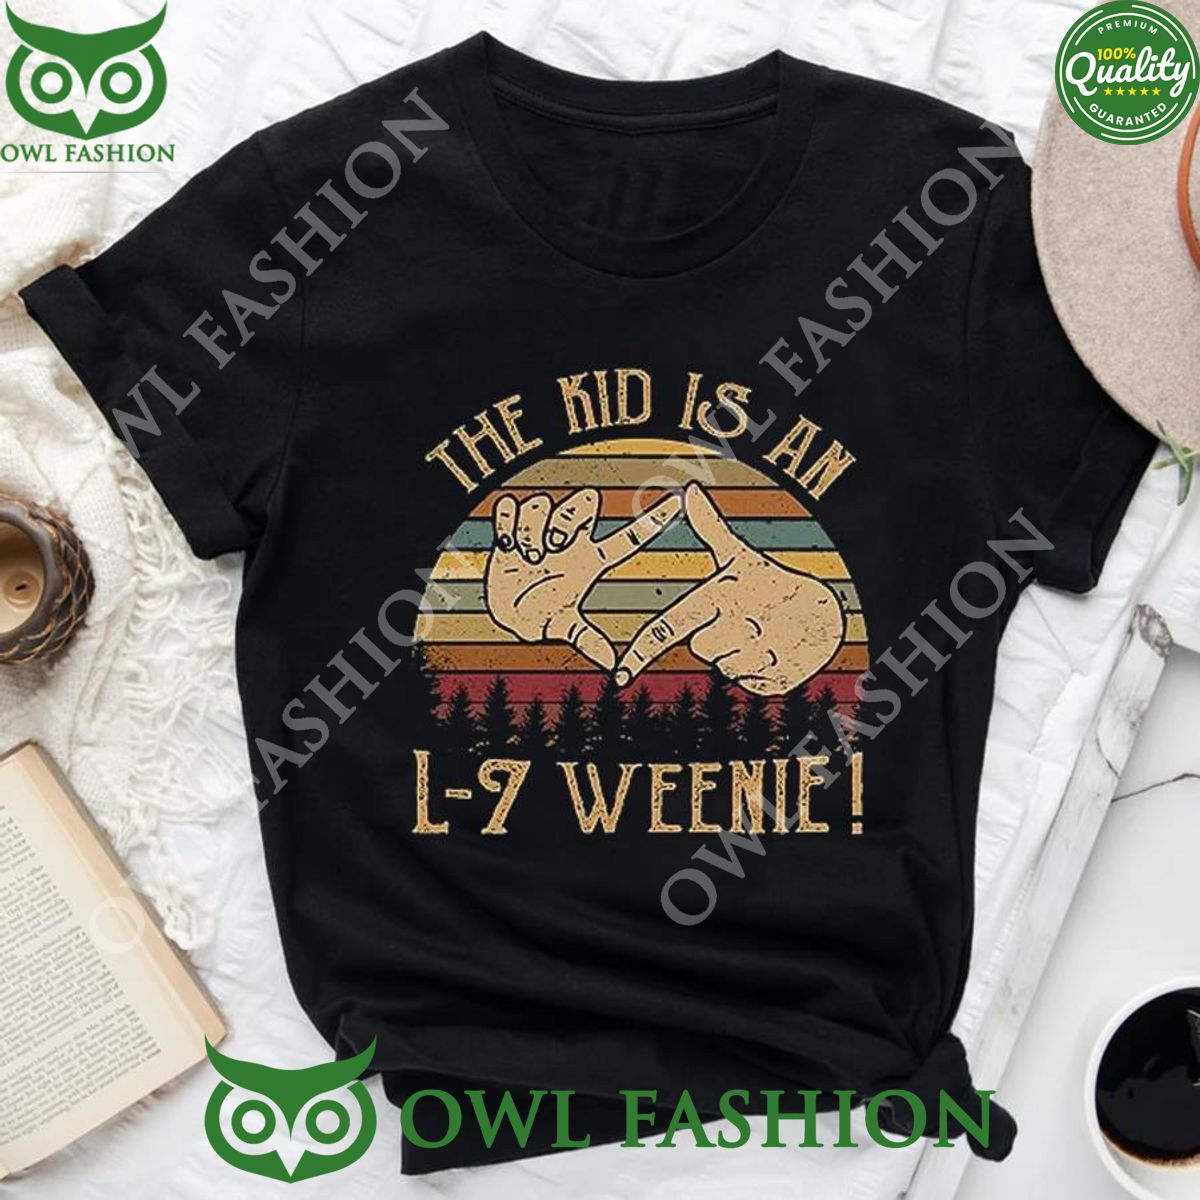 The Kid is an L7 Weenie The Sandlot vintage t shirt